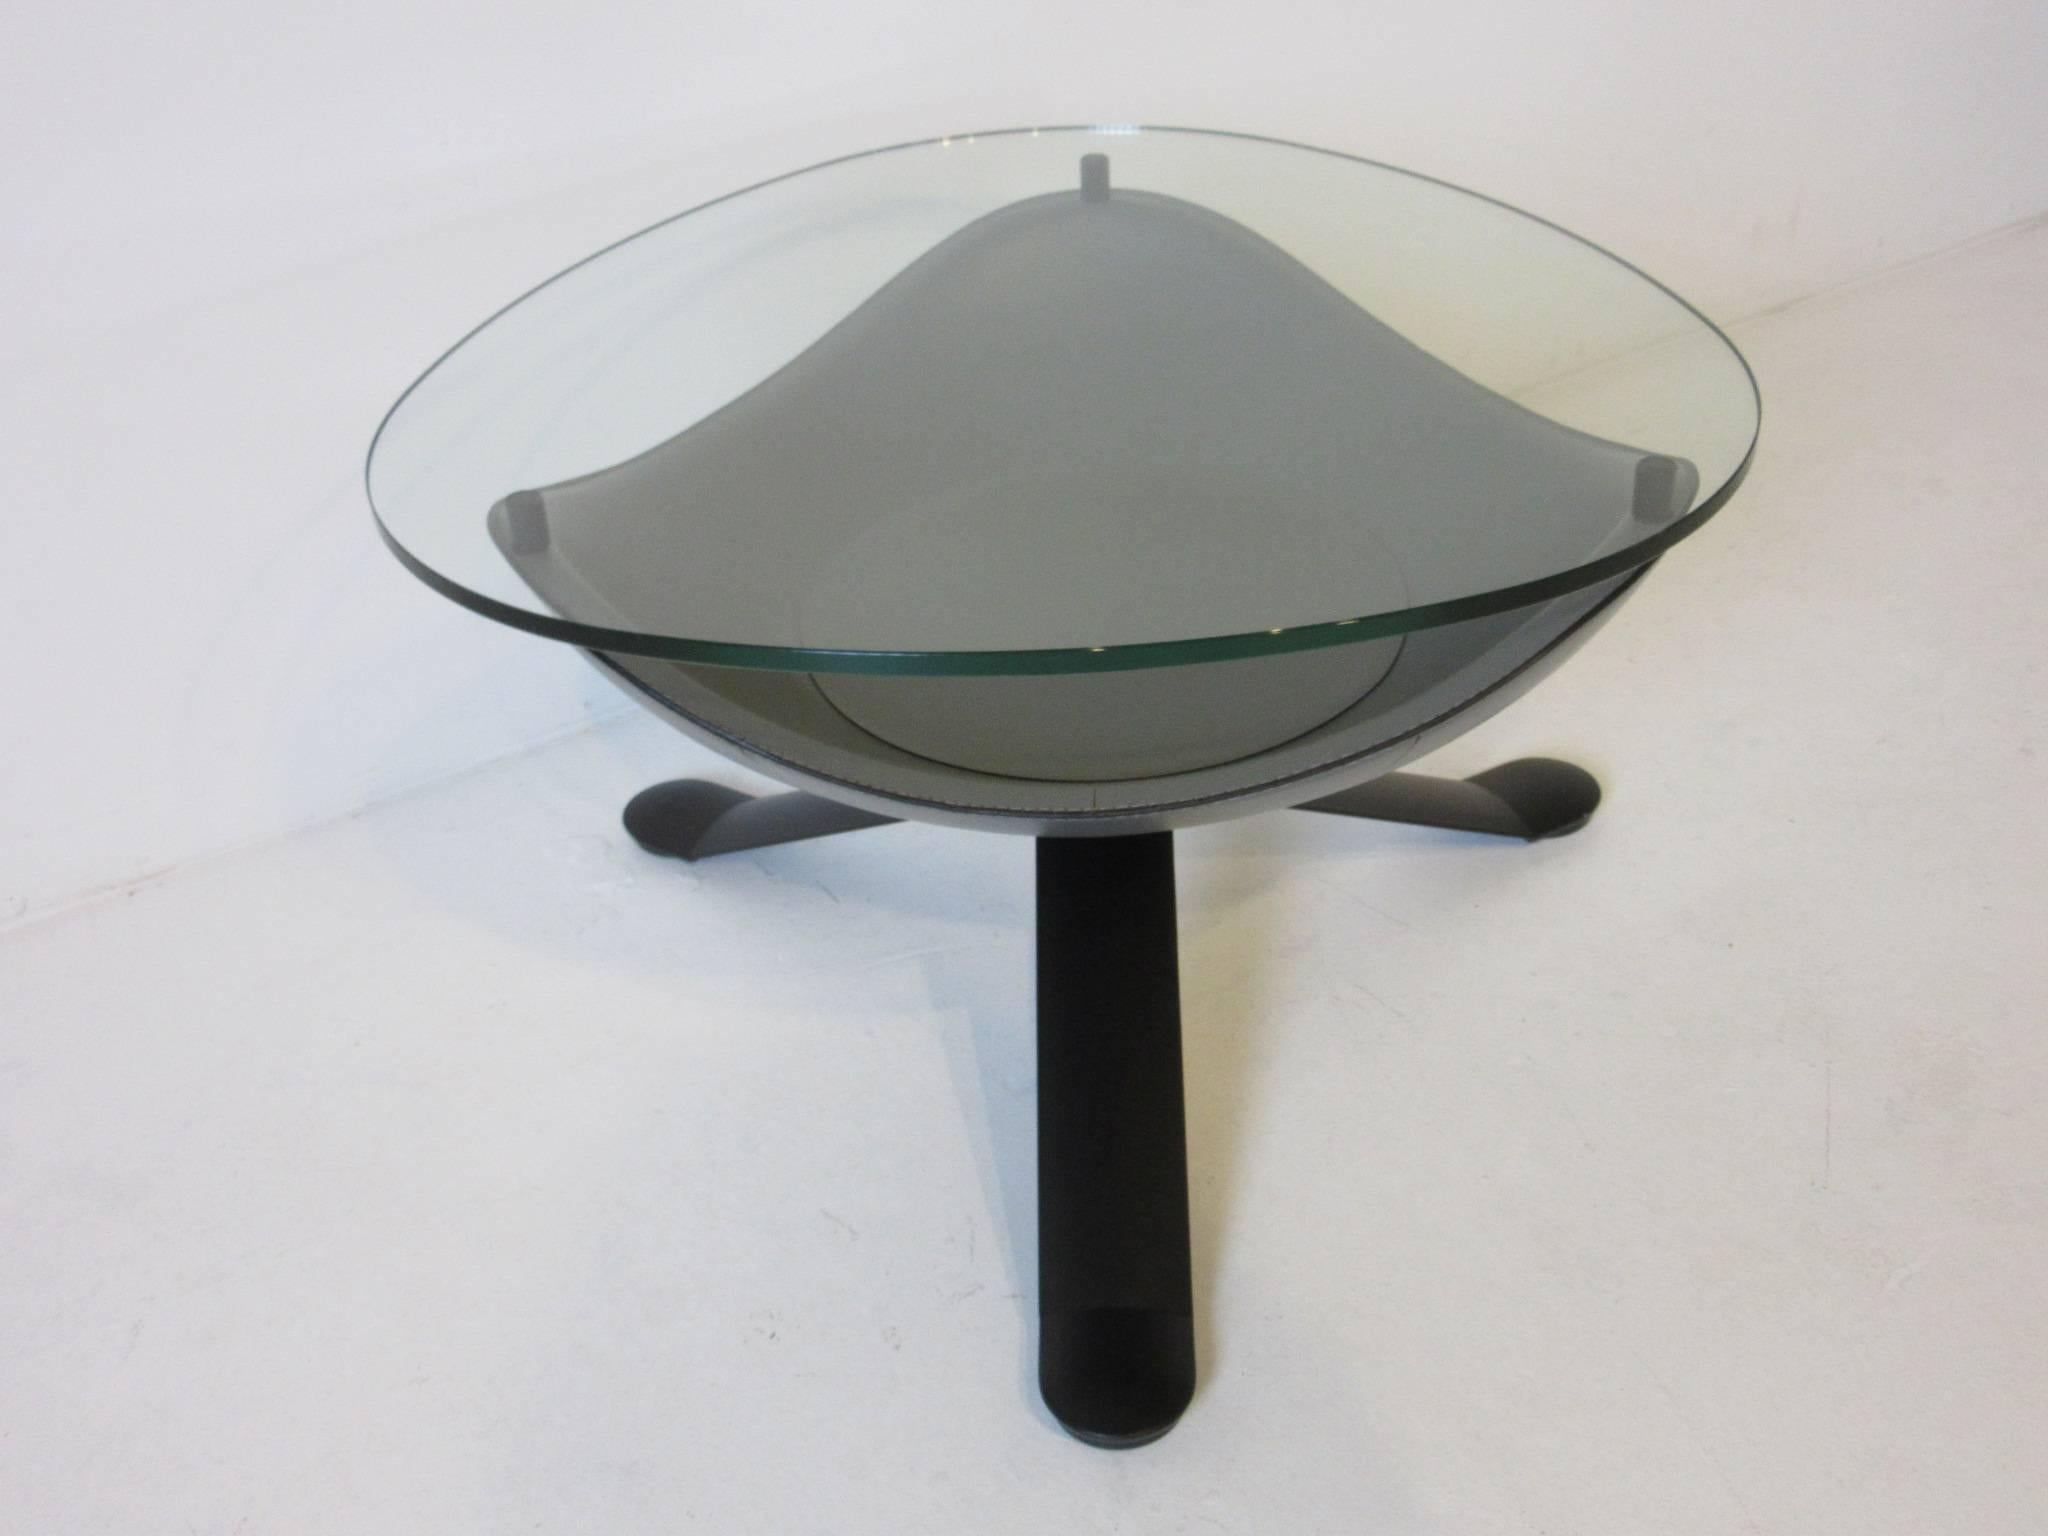 A sculptural gray molded and stitched leather with plate glass topped side or coffee table sitting on a three pronged satin black metal base. Designed in a bowl form for a bit of storage under the glass top from Italian designer Matteo Grassi.